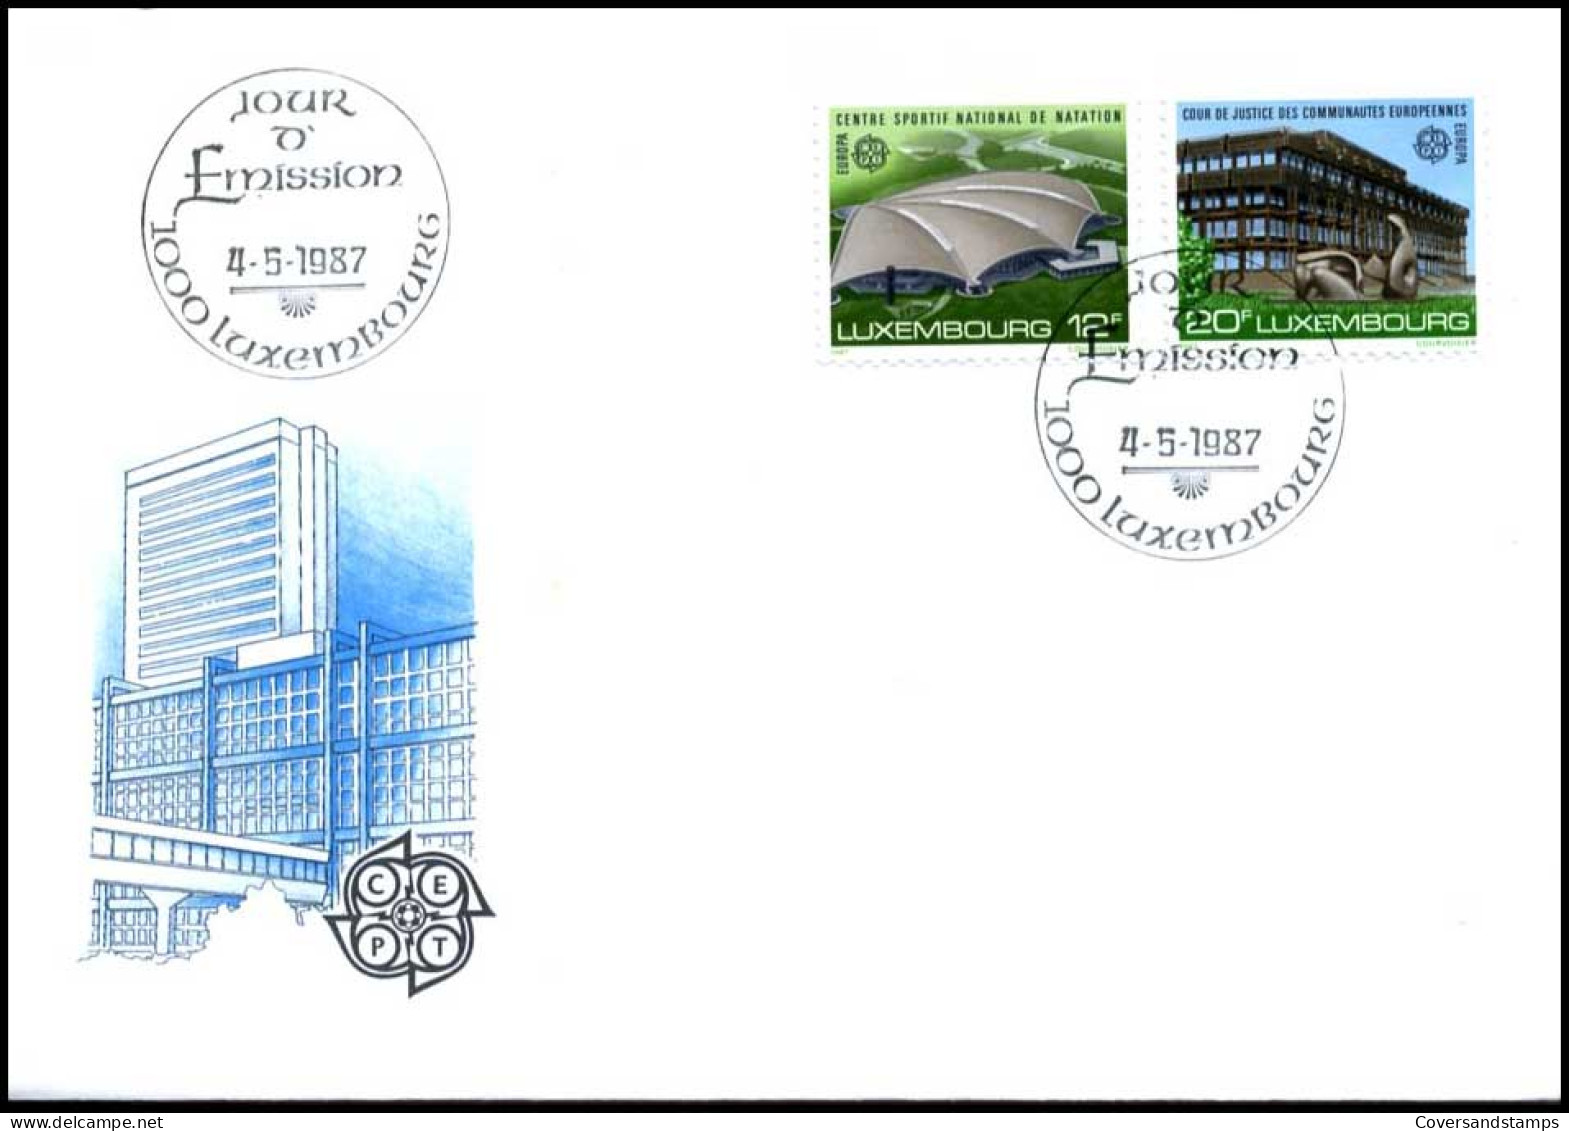  Luxembourg - FDC - Europa CEPT 1987 - 1987